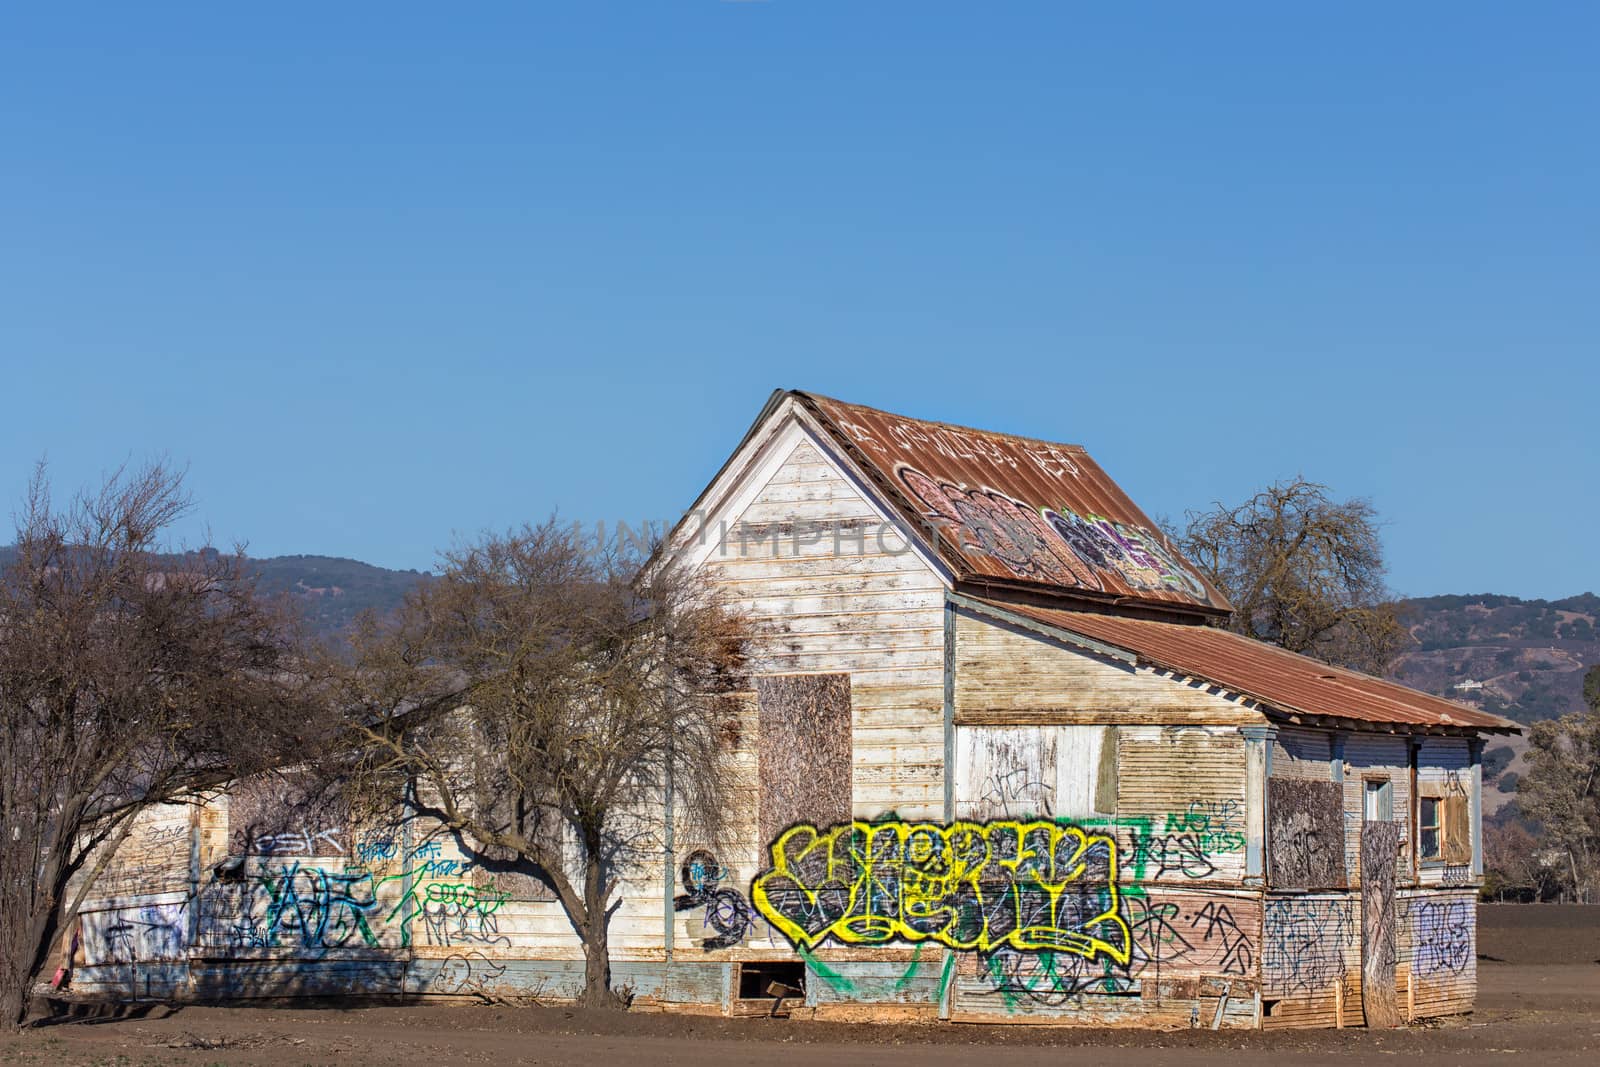 Dilapidated and Abandoned Farm House Marked with Graffiti in the United States.